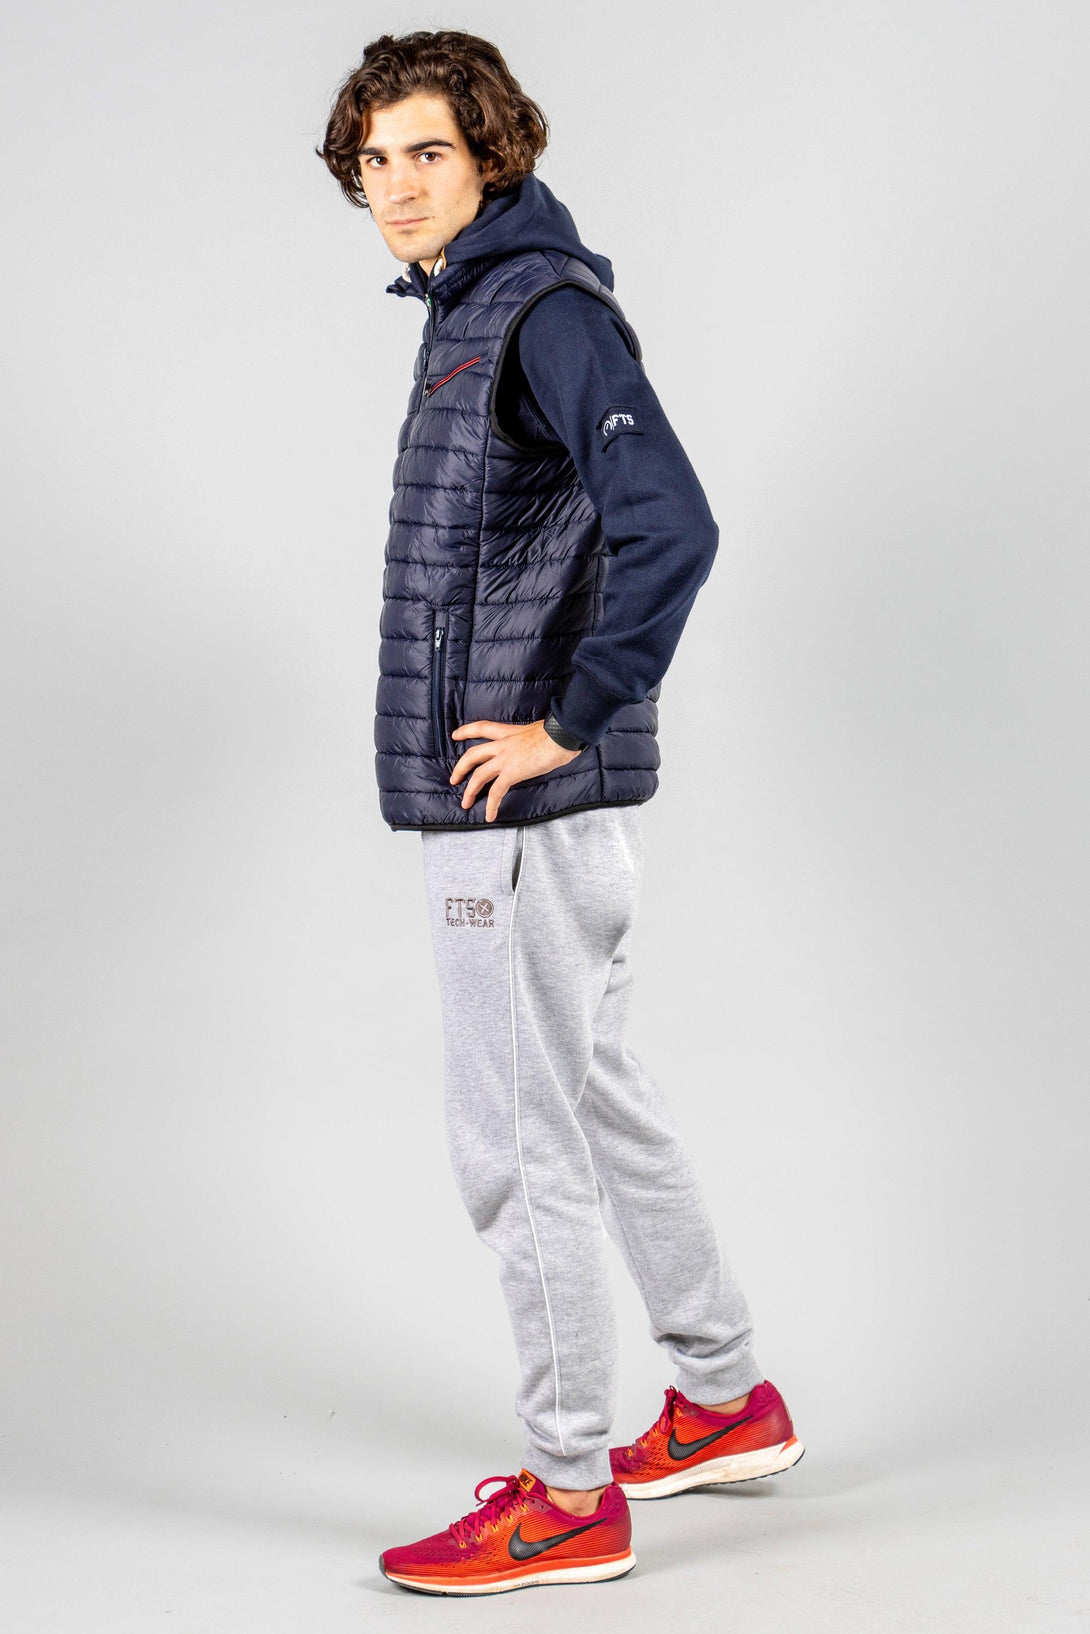 GILETS in Navy Blue Colors - FTS